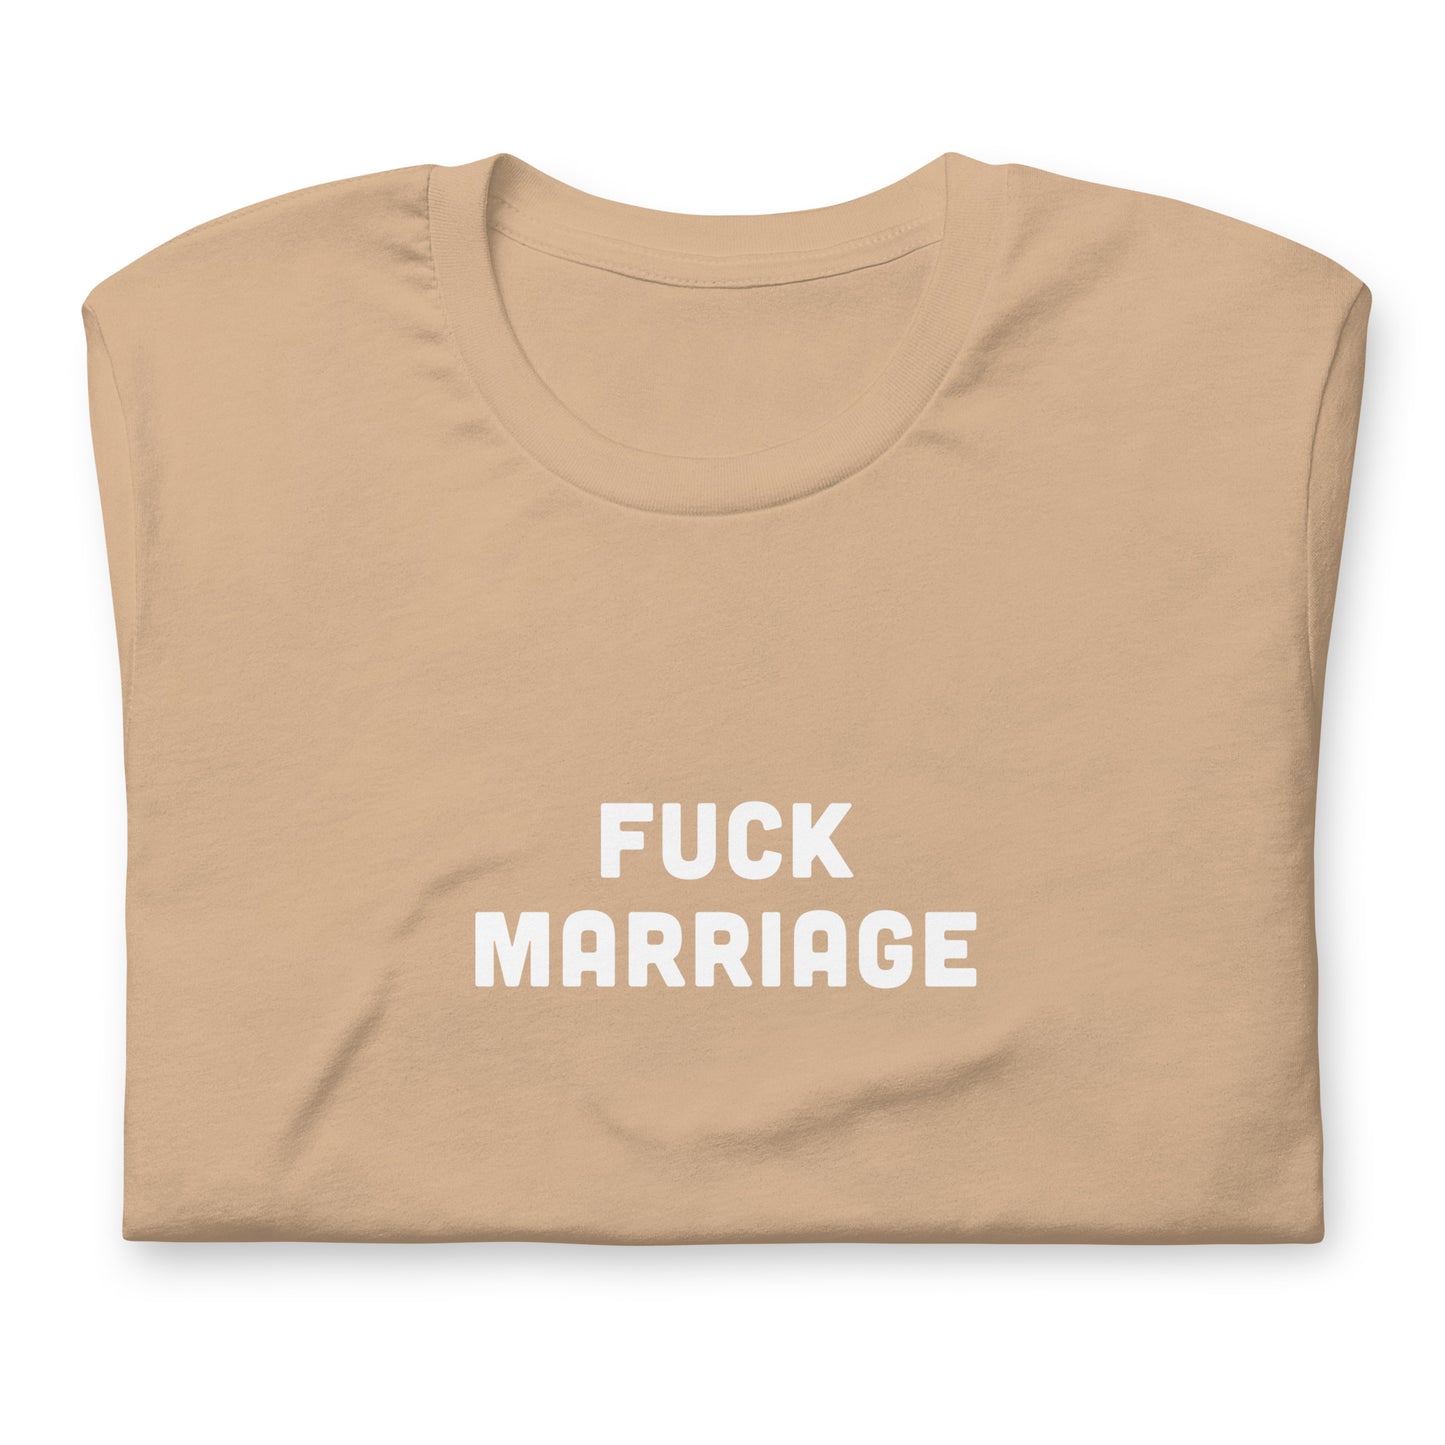 Fuck Marriage T-Shirt Size 2XL Color Forest